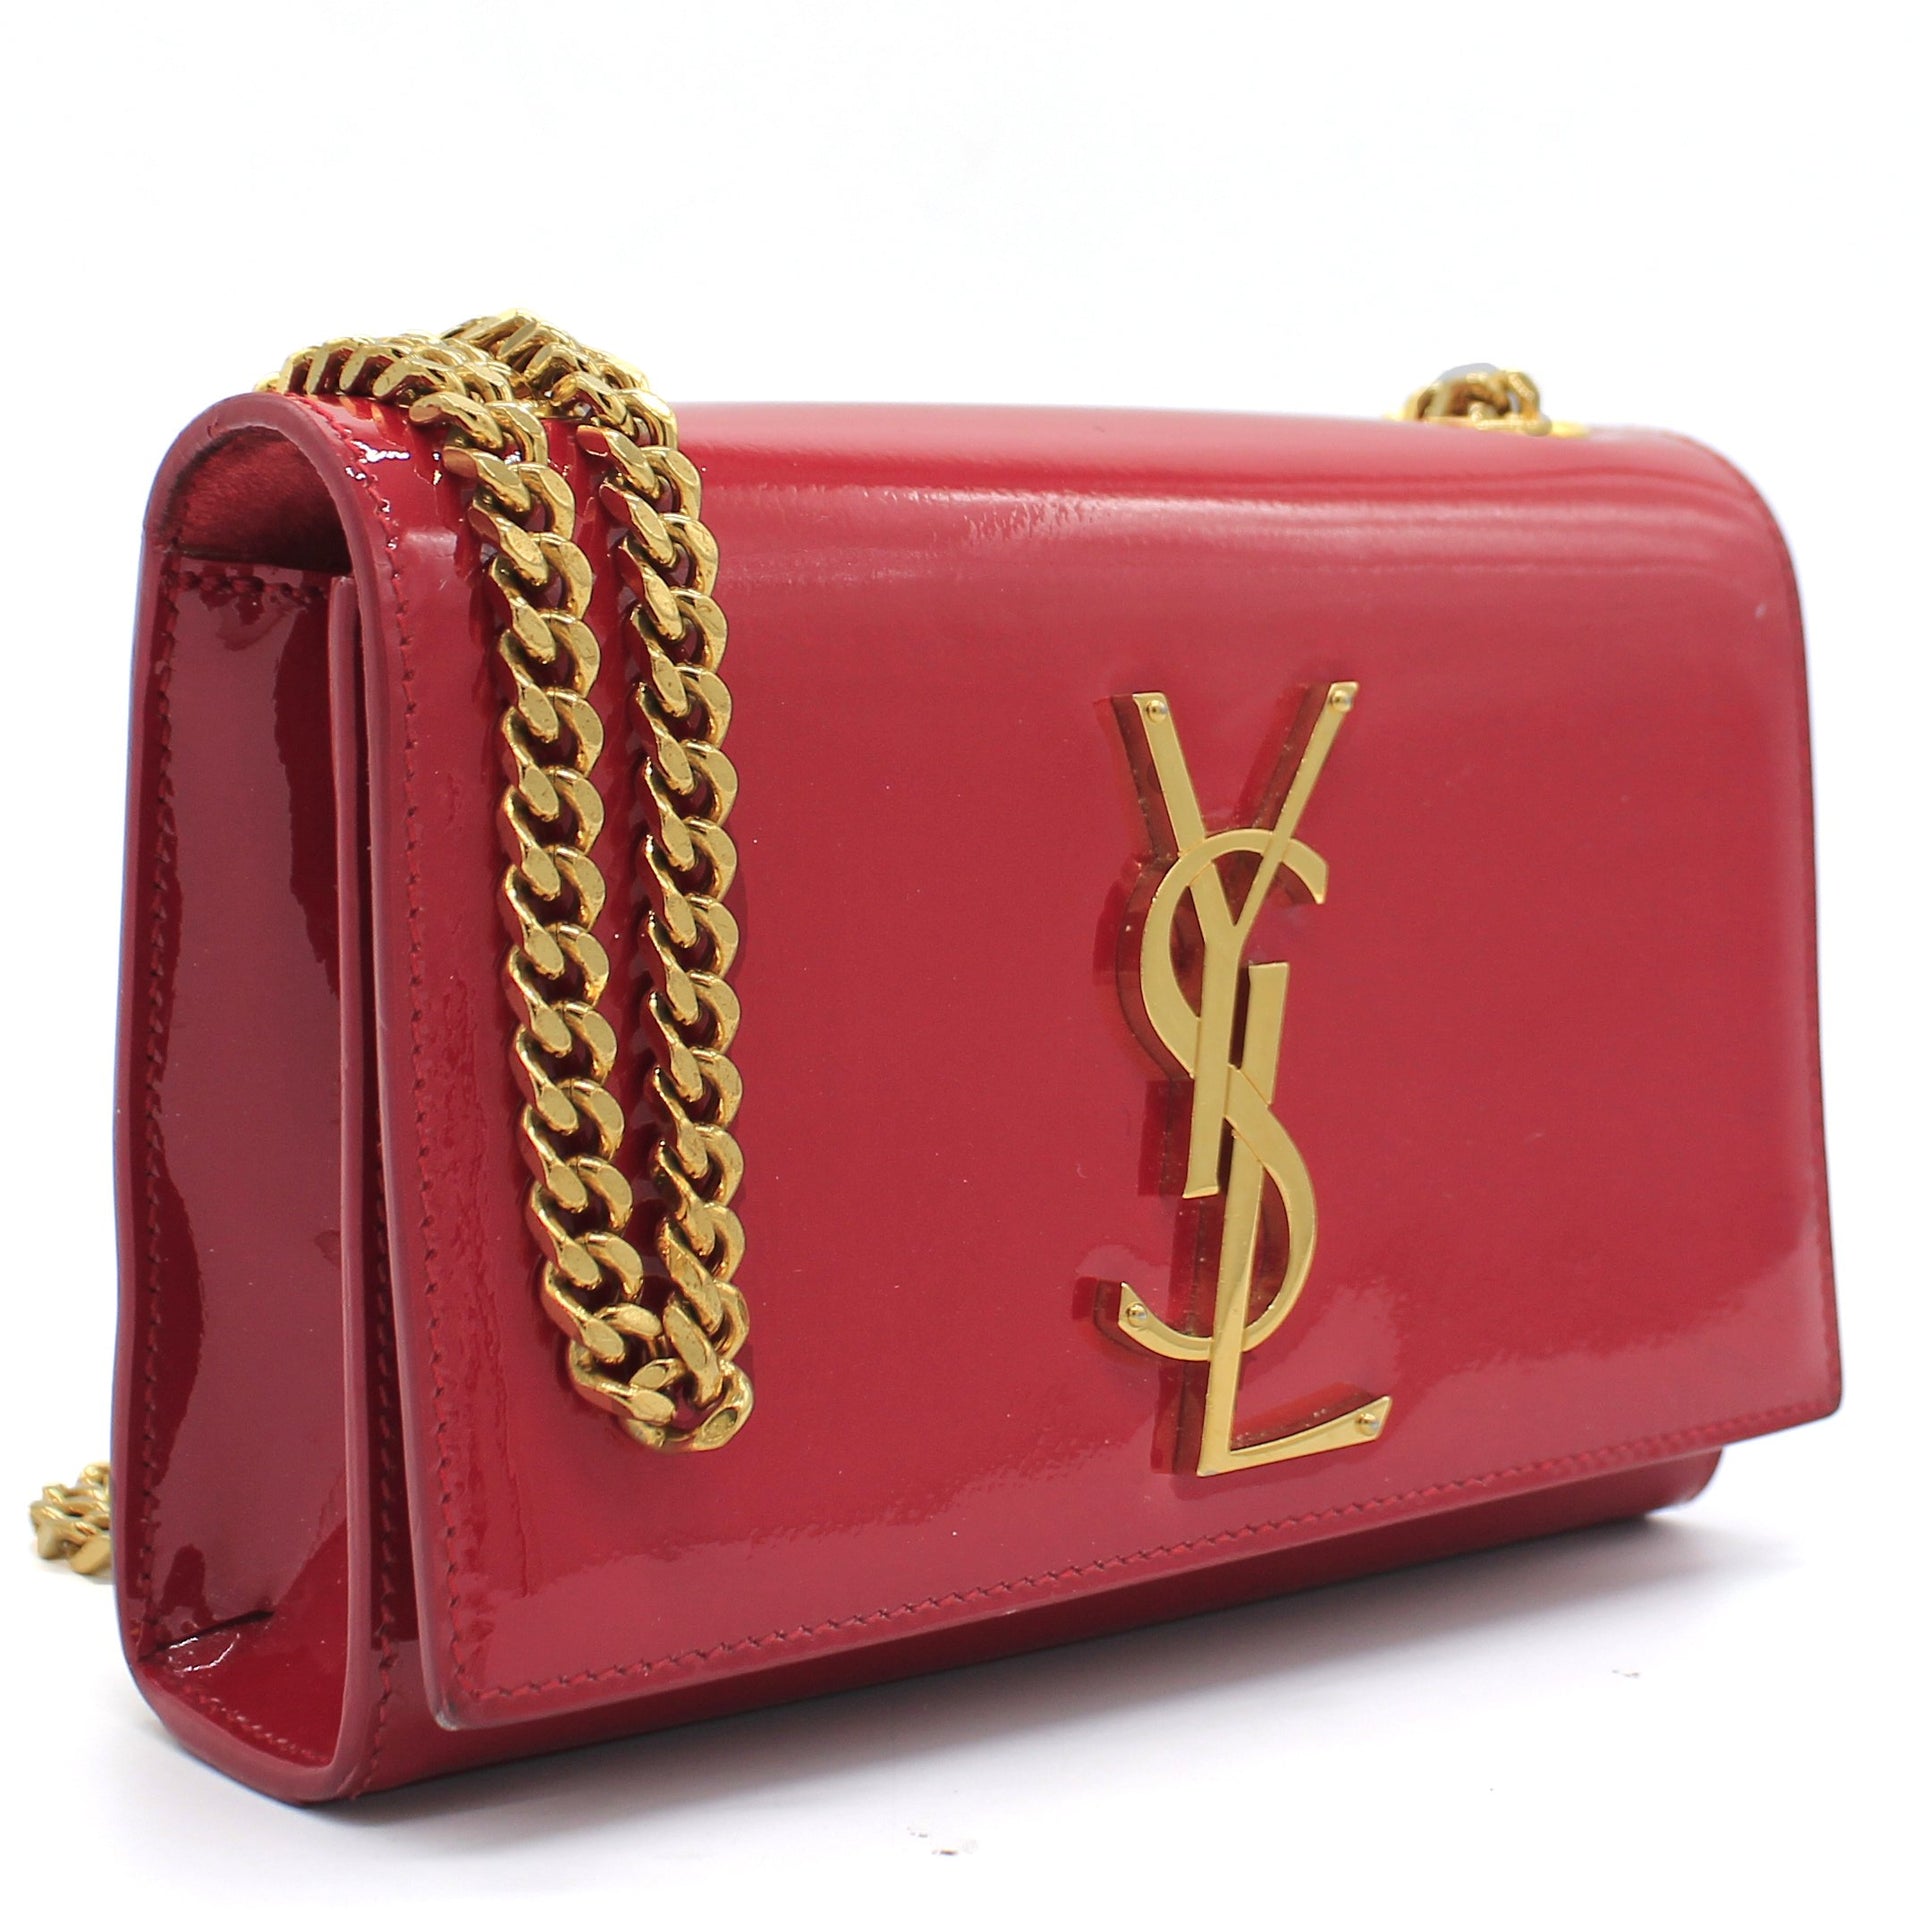 Small Kate Bag in Red Patent Leather